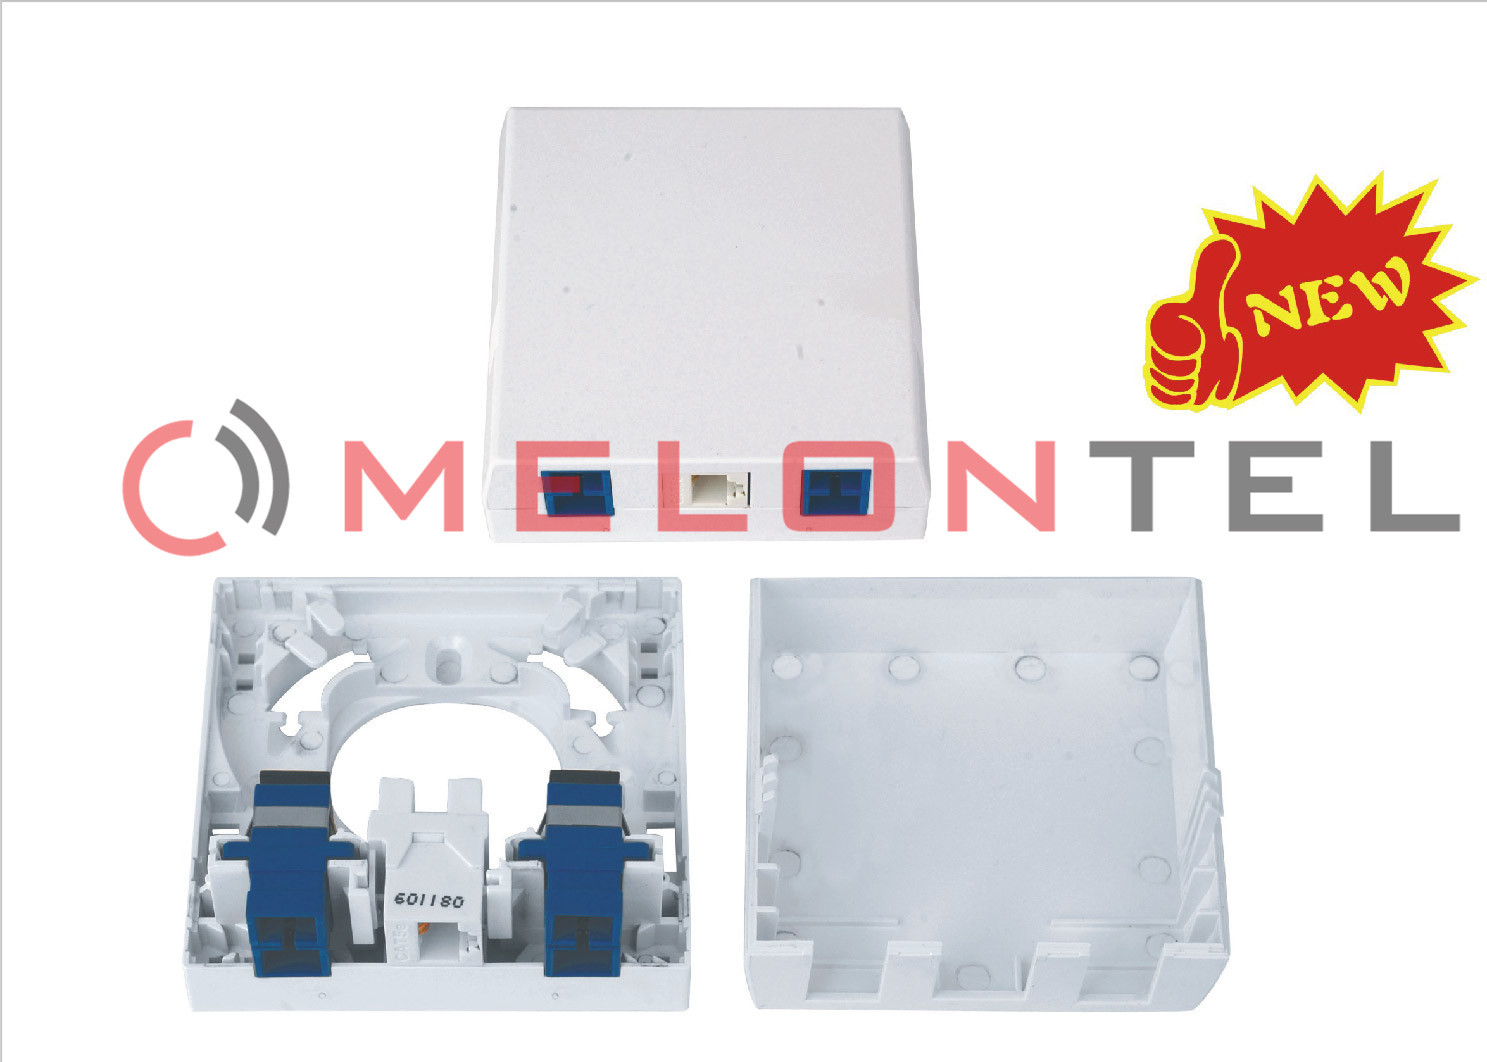 Best Waterproof Surface Mounted Ftth Termination Box 4 Port 86x86x22mm Dimensions wholesale